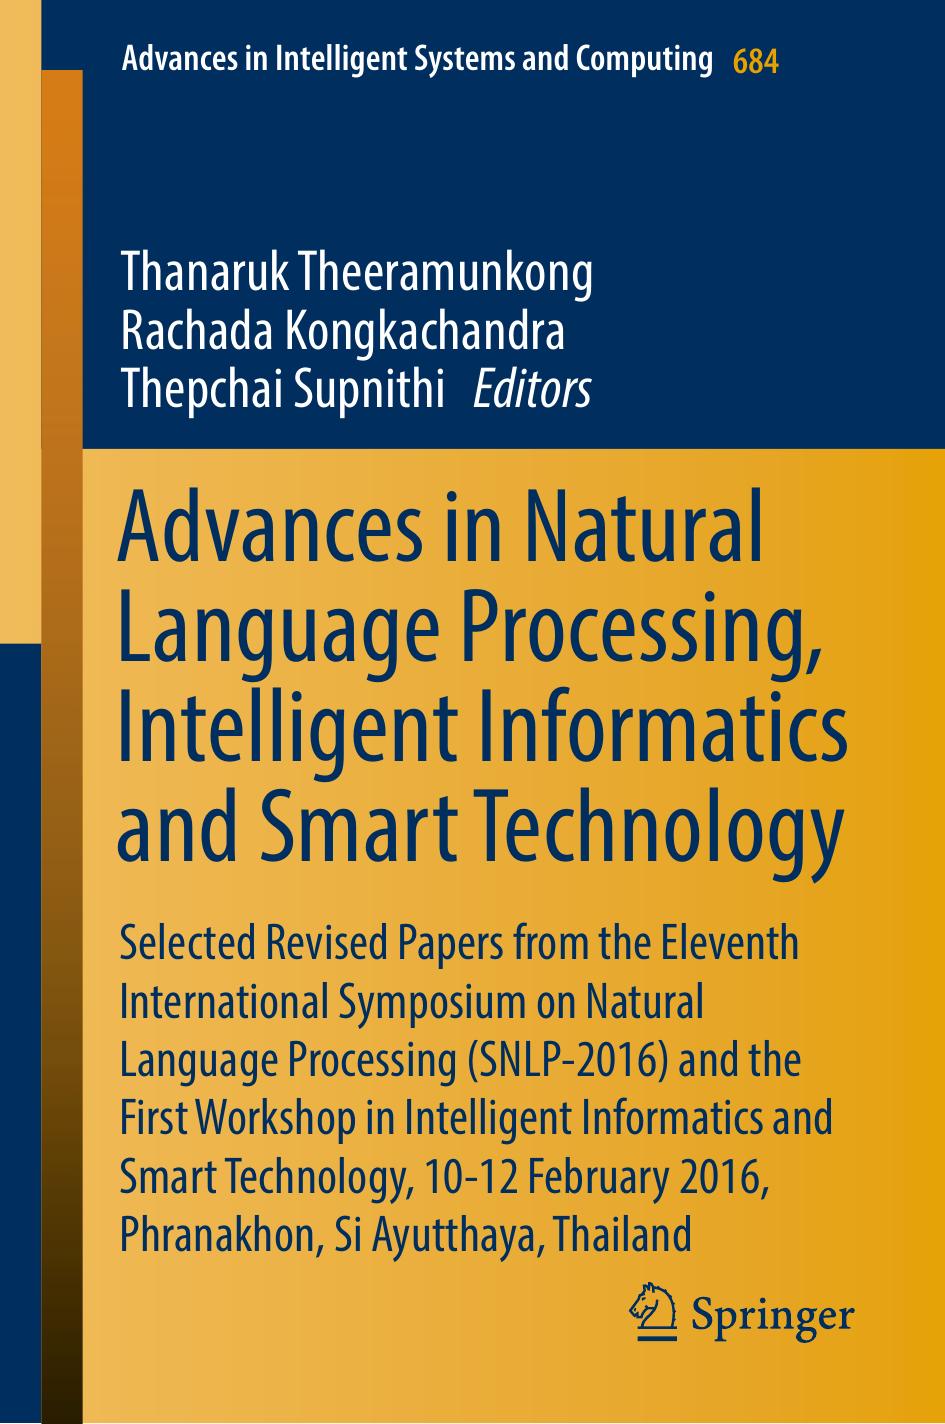 Advances in Natural Language Processing, Intelligent Informatics and Smart Technology: Selected Revised Papers From the Eleventh International Symposium on Natural Language Processing (SNLP-2016) and the First Workshop in Intelligent Informatics and Smart Technology, 10-12 February 2016, Phranakhon, Si Ayutthaya, Thailand